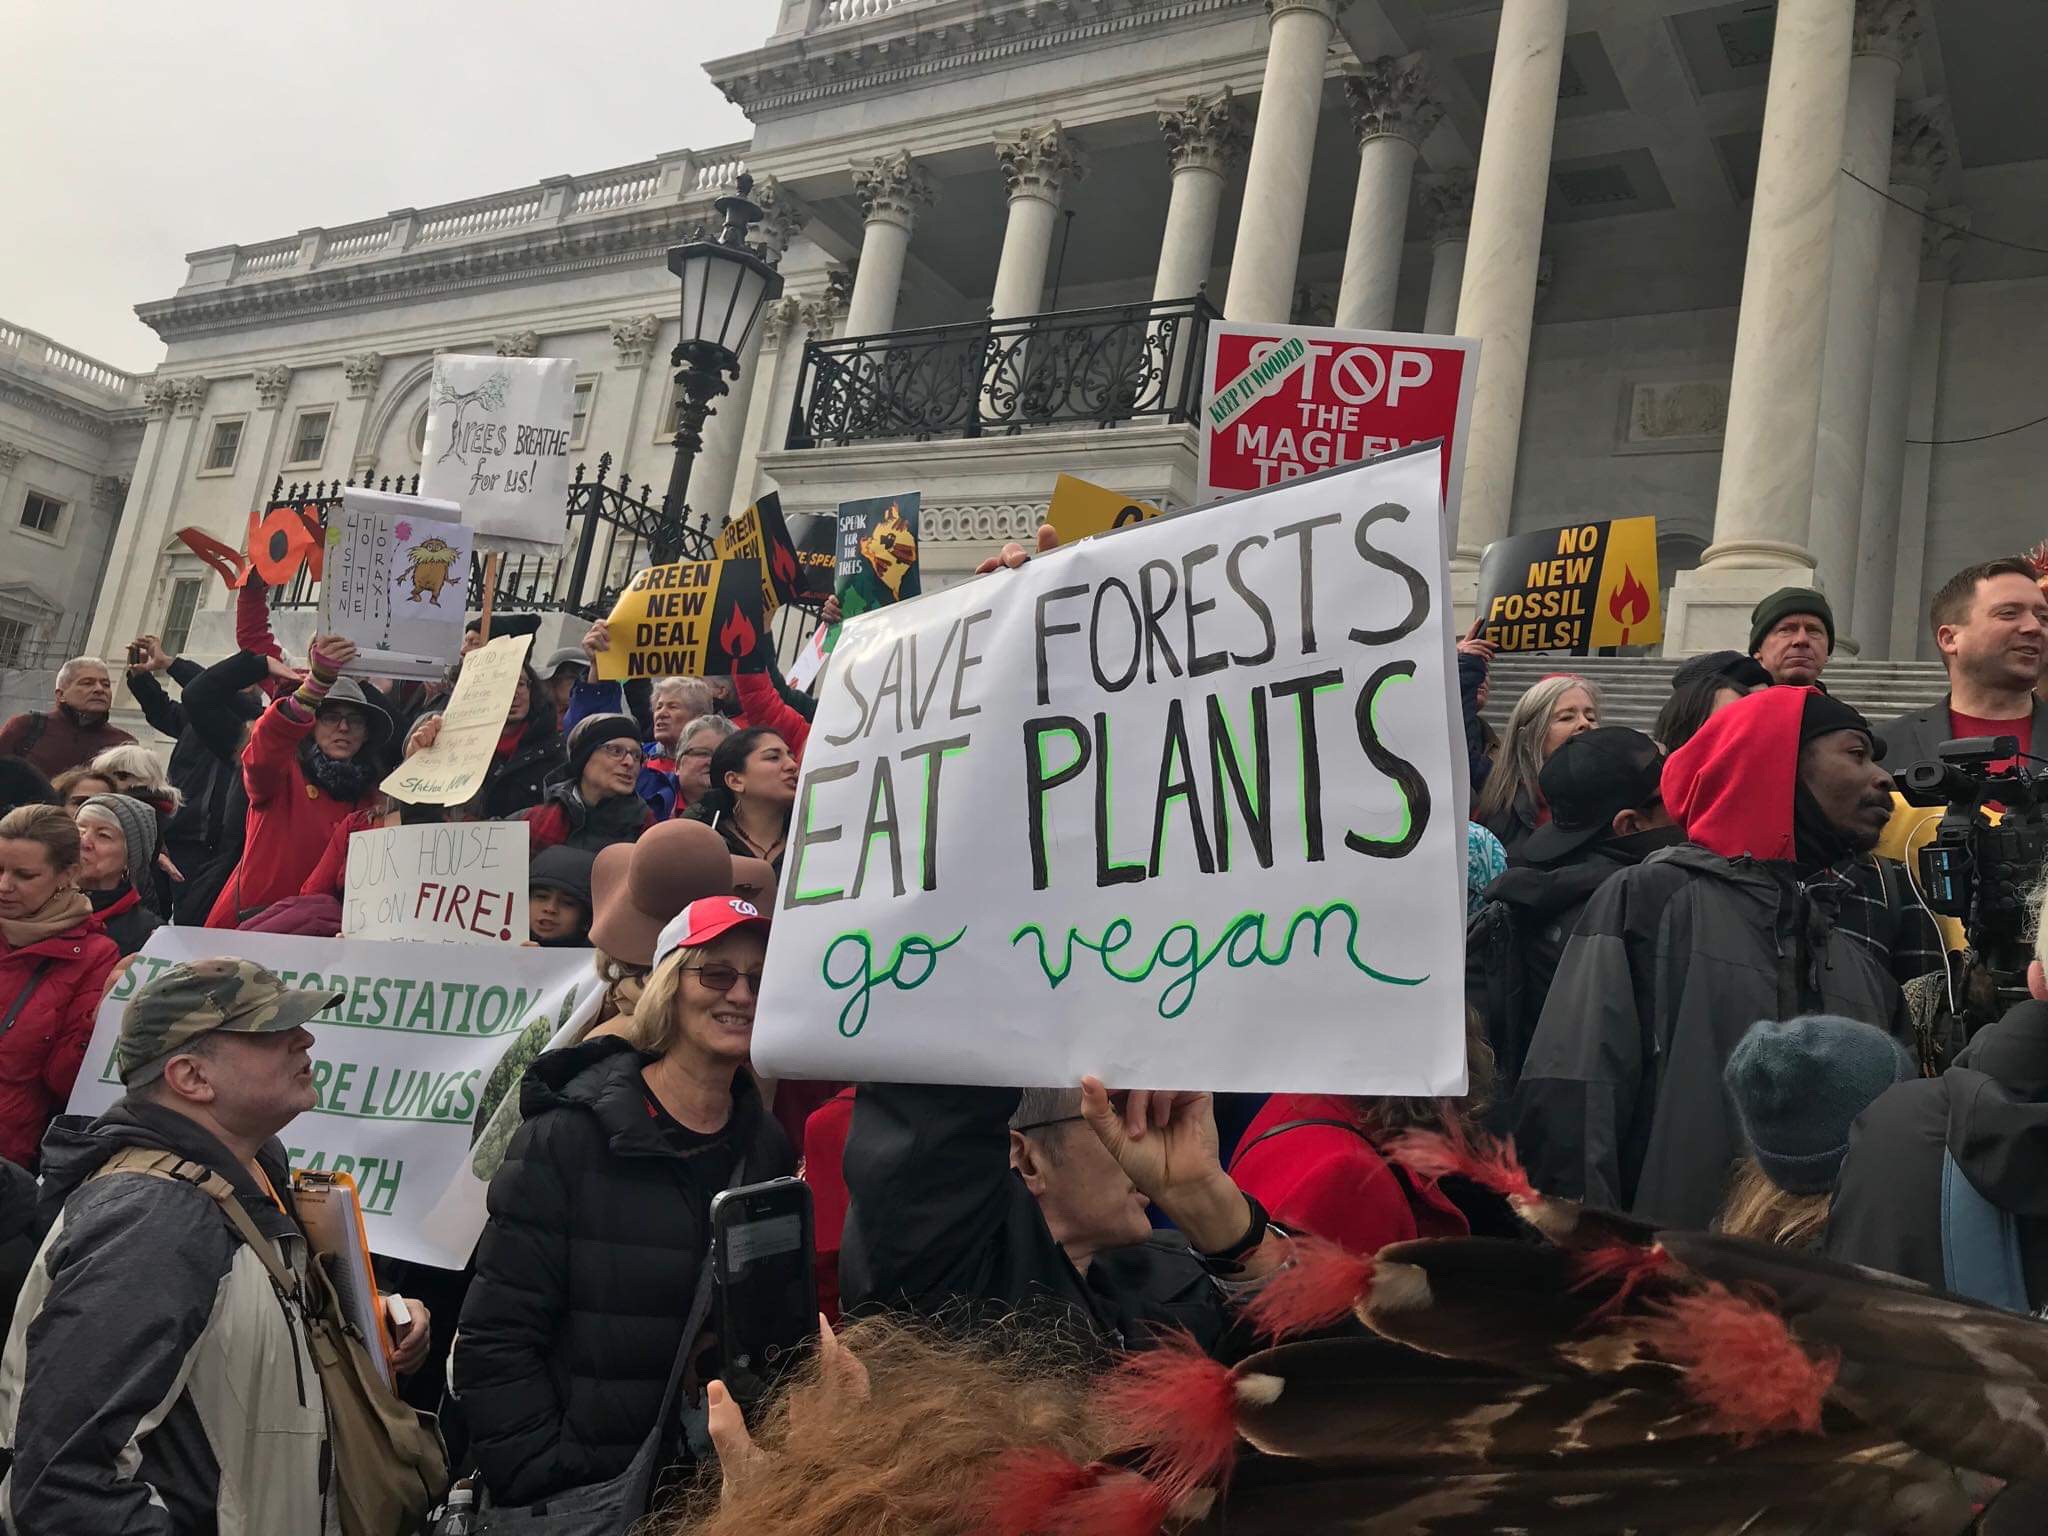 Protesters with Save Forests Eat Plants Sign